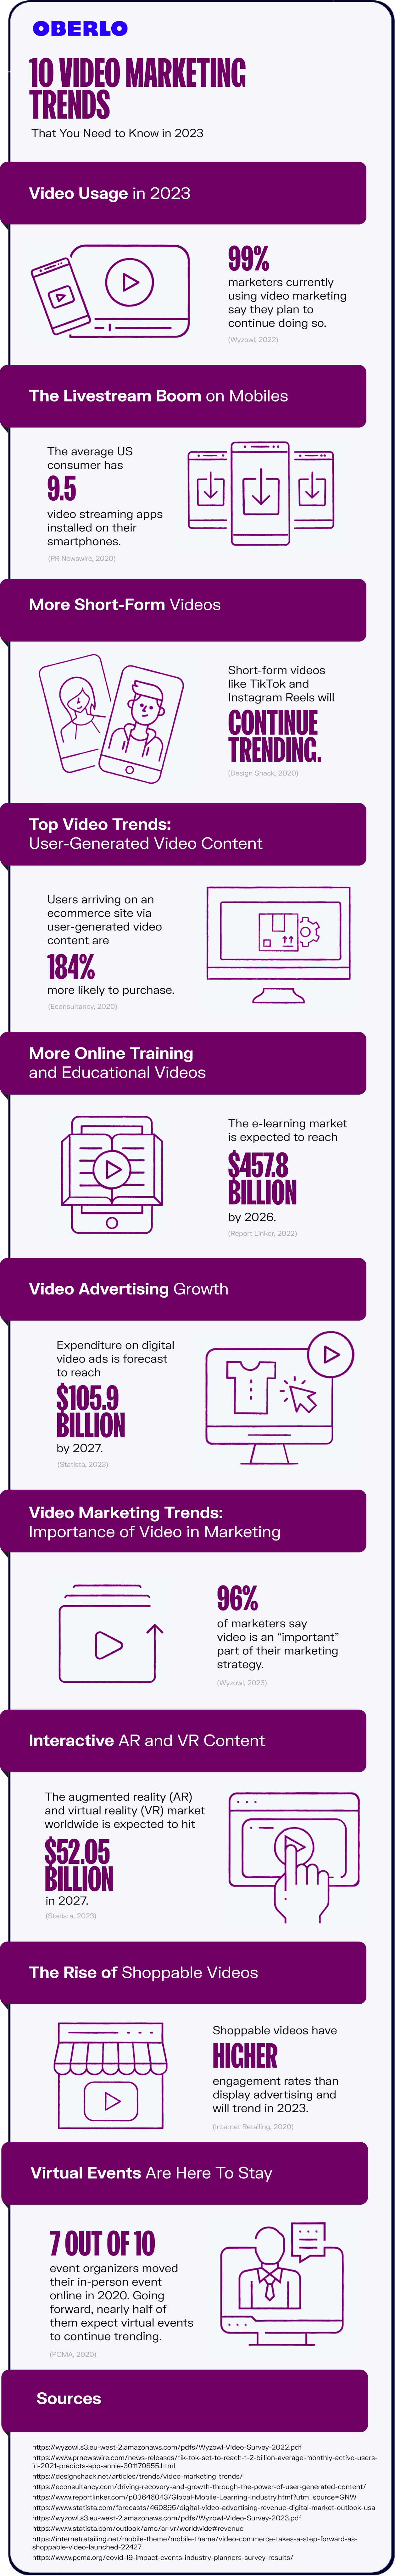 video marketing trends full infographic